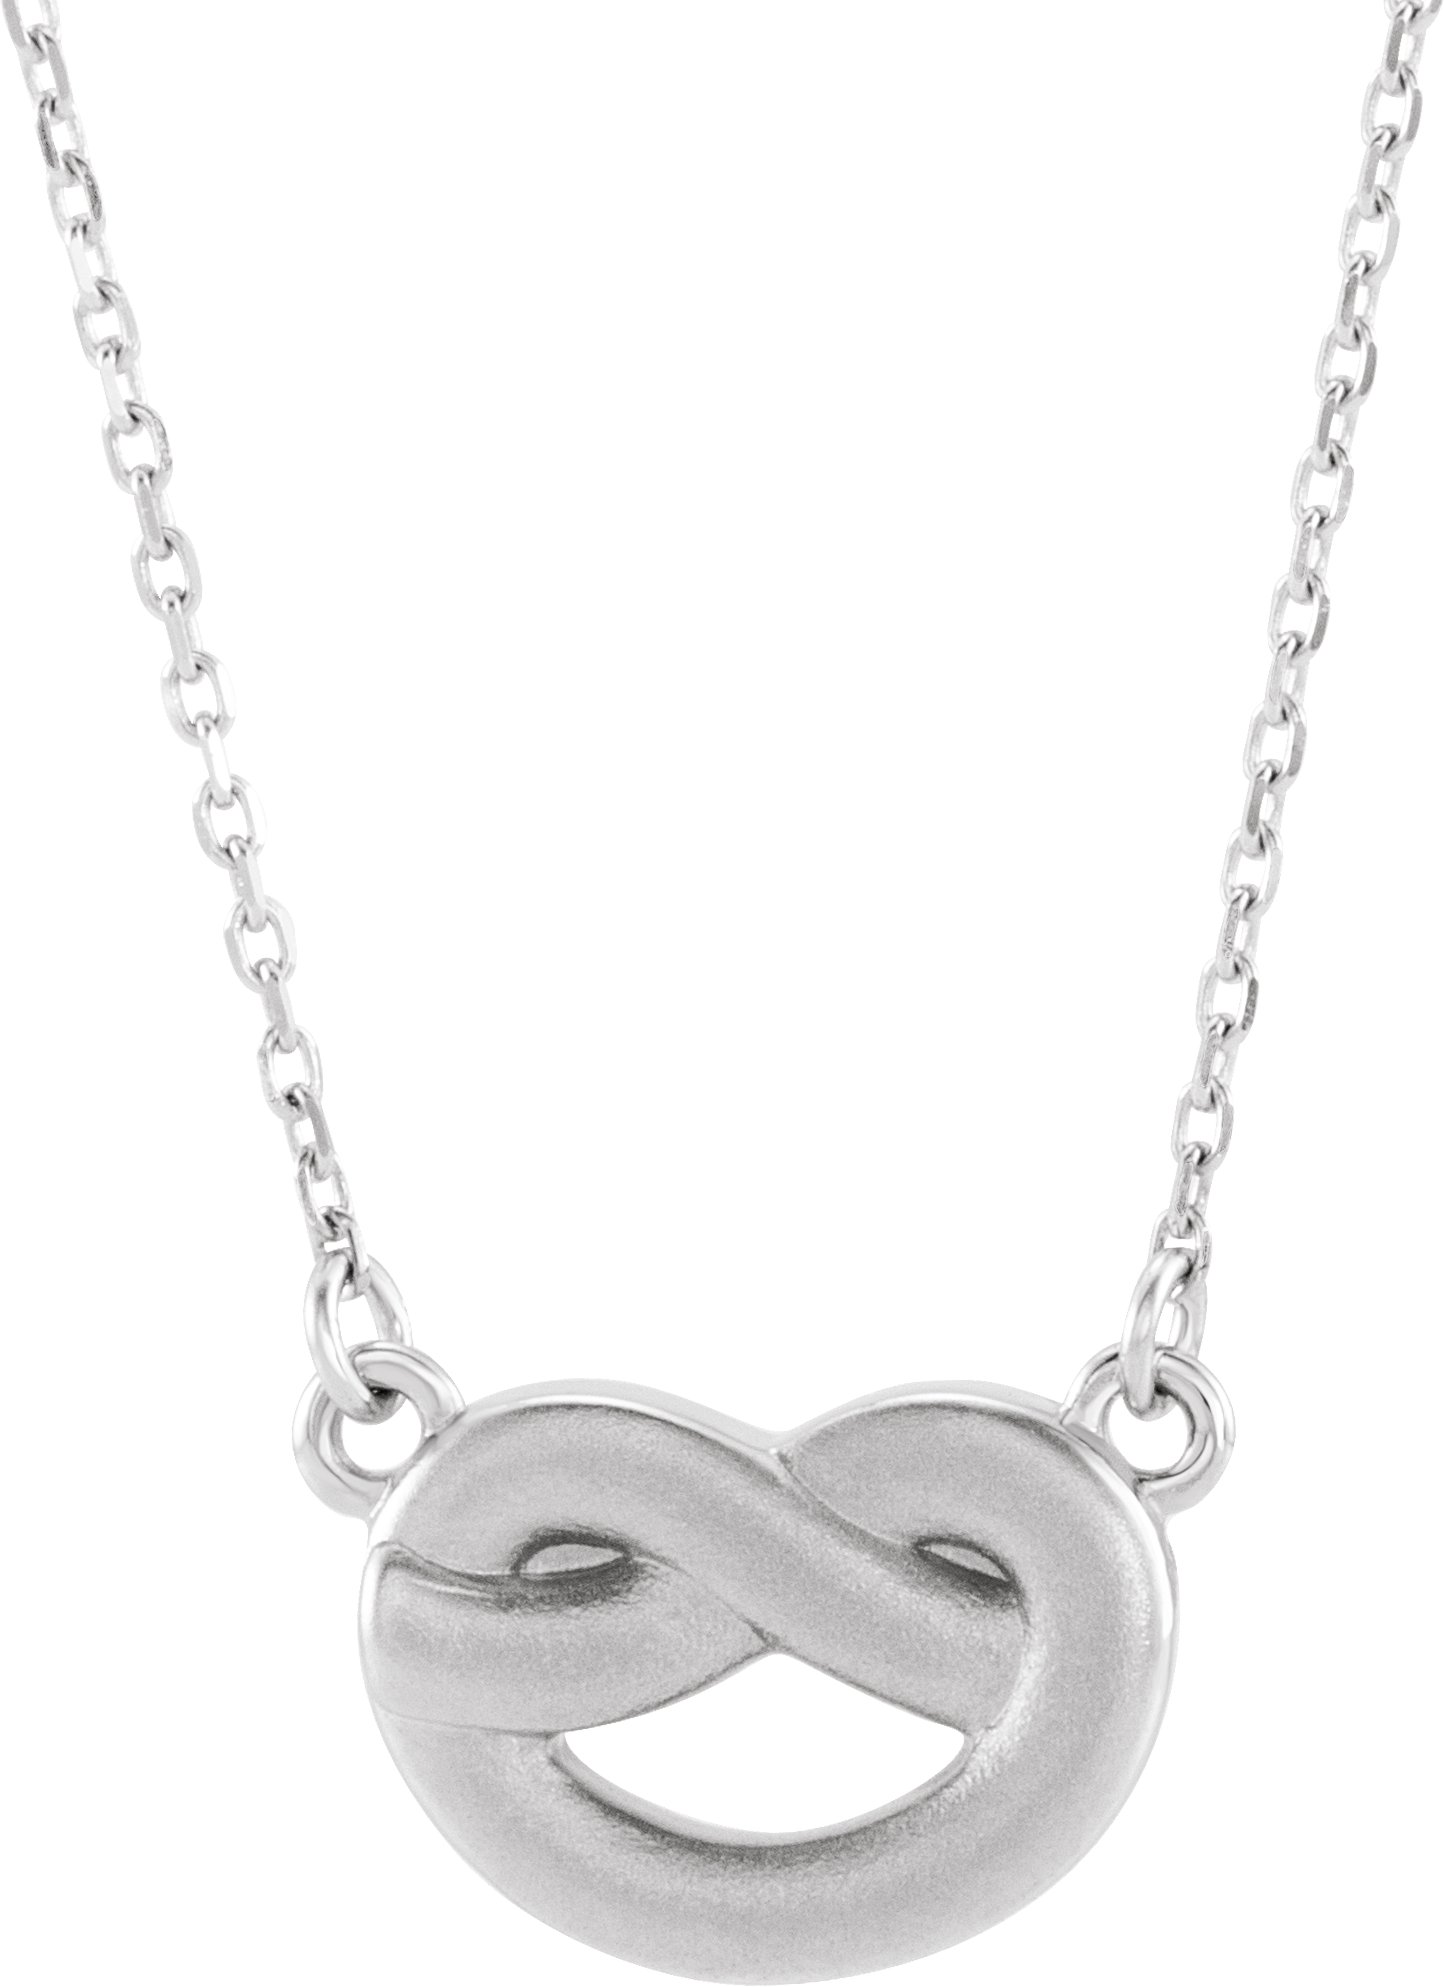 Sterling Silver Knot 16 18 inch Necklace Ref. 13185065